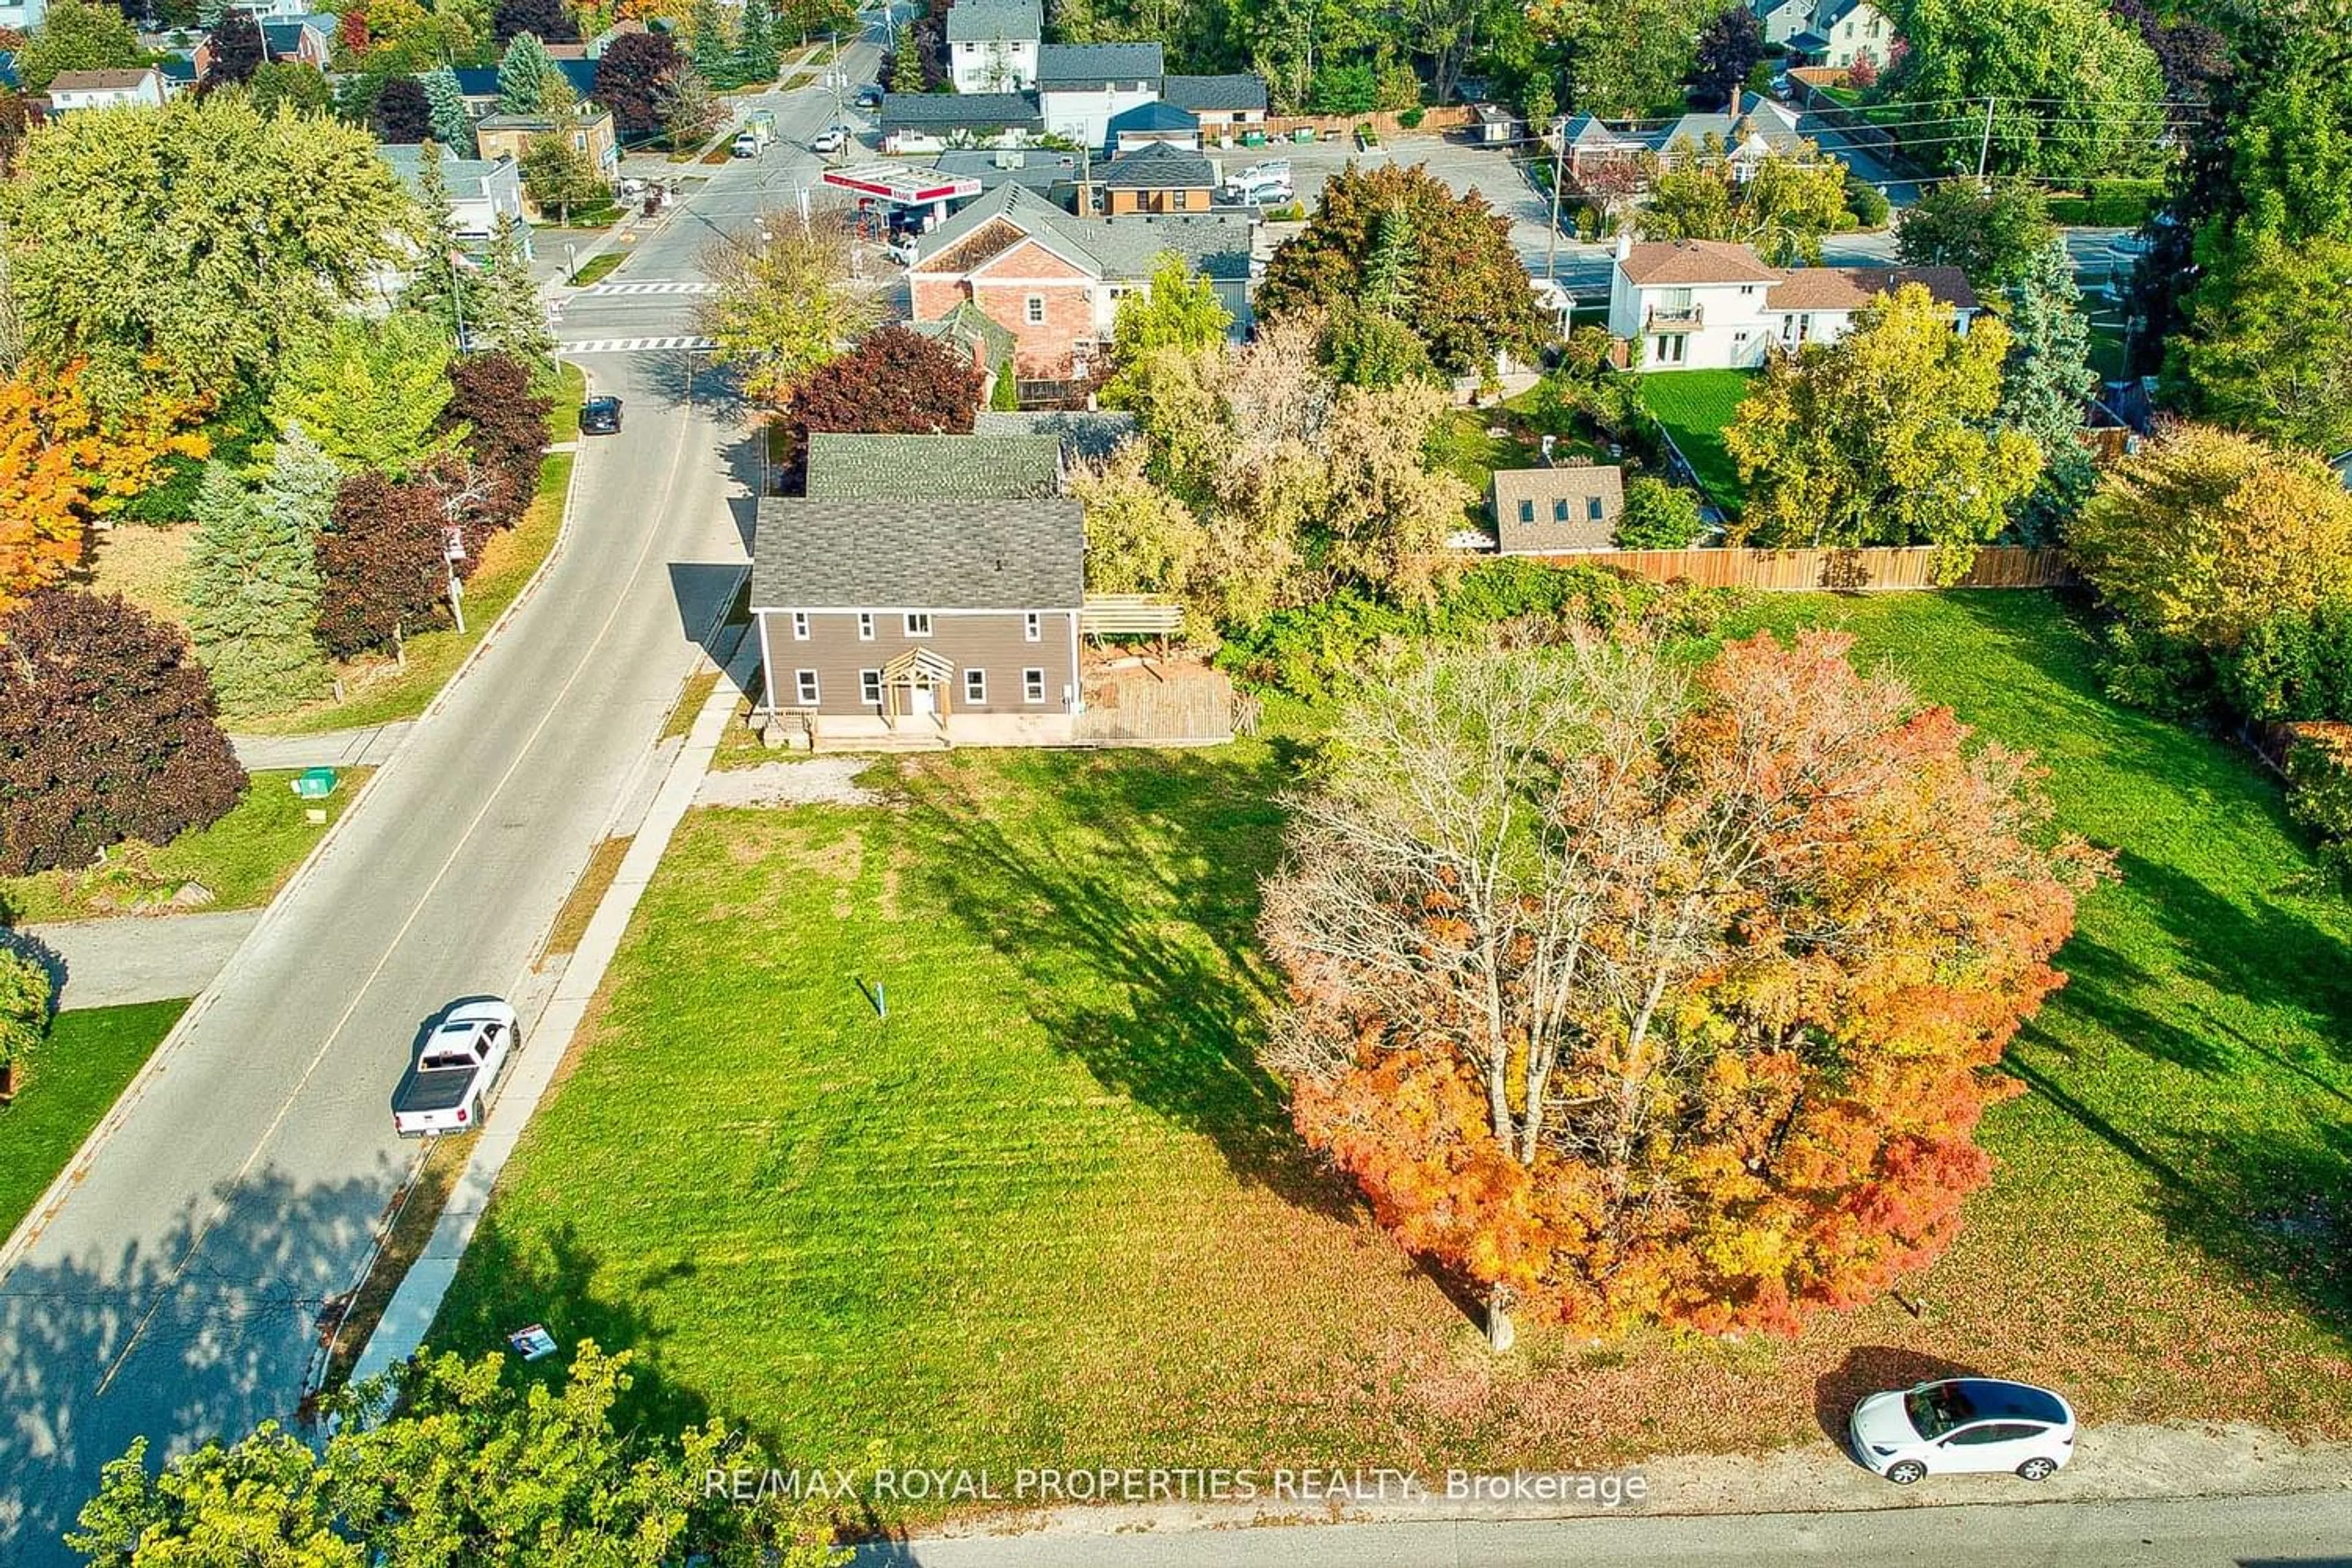 Street view for 4973 Old Brock Rd, Pickering Ontario L1Y 1A9